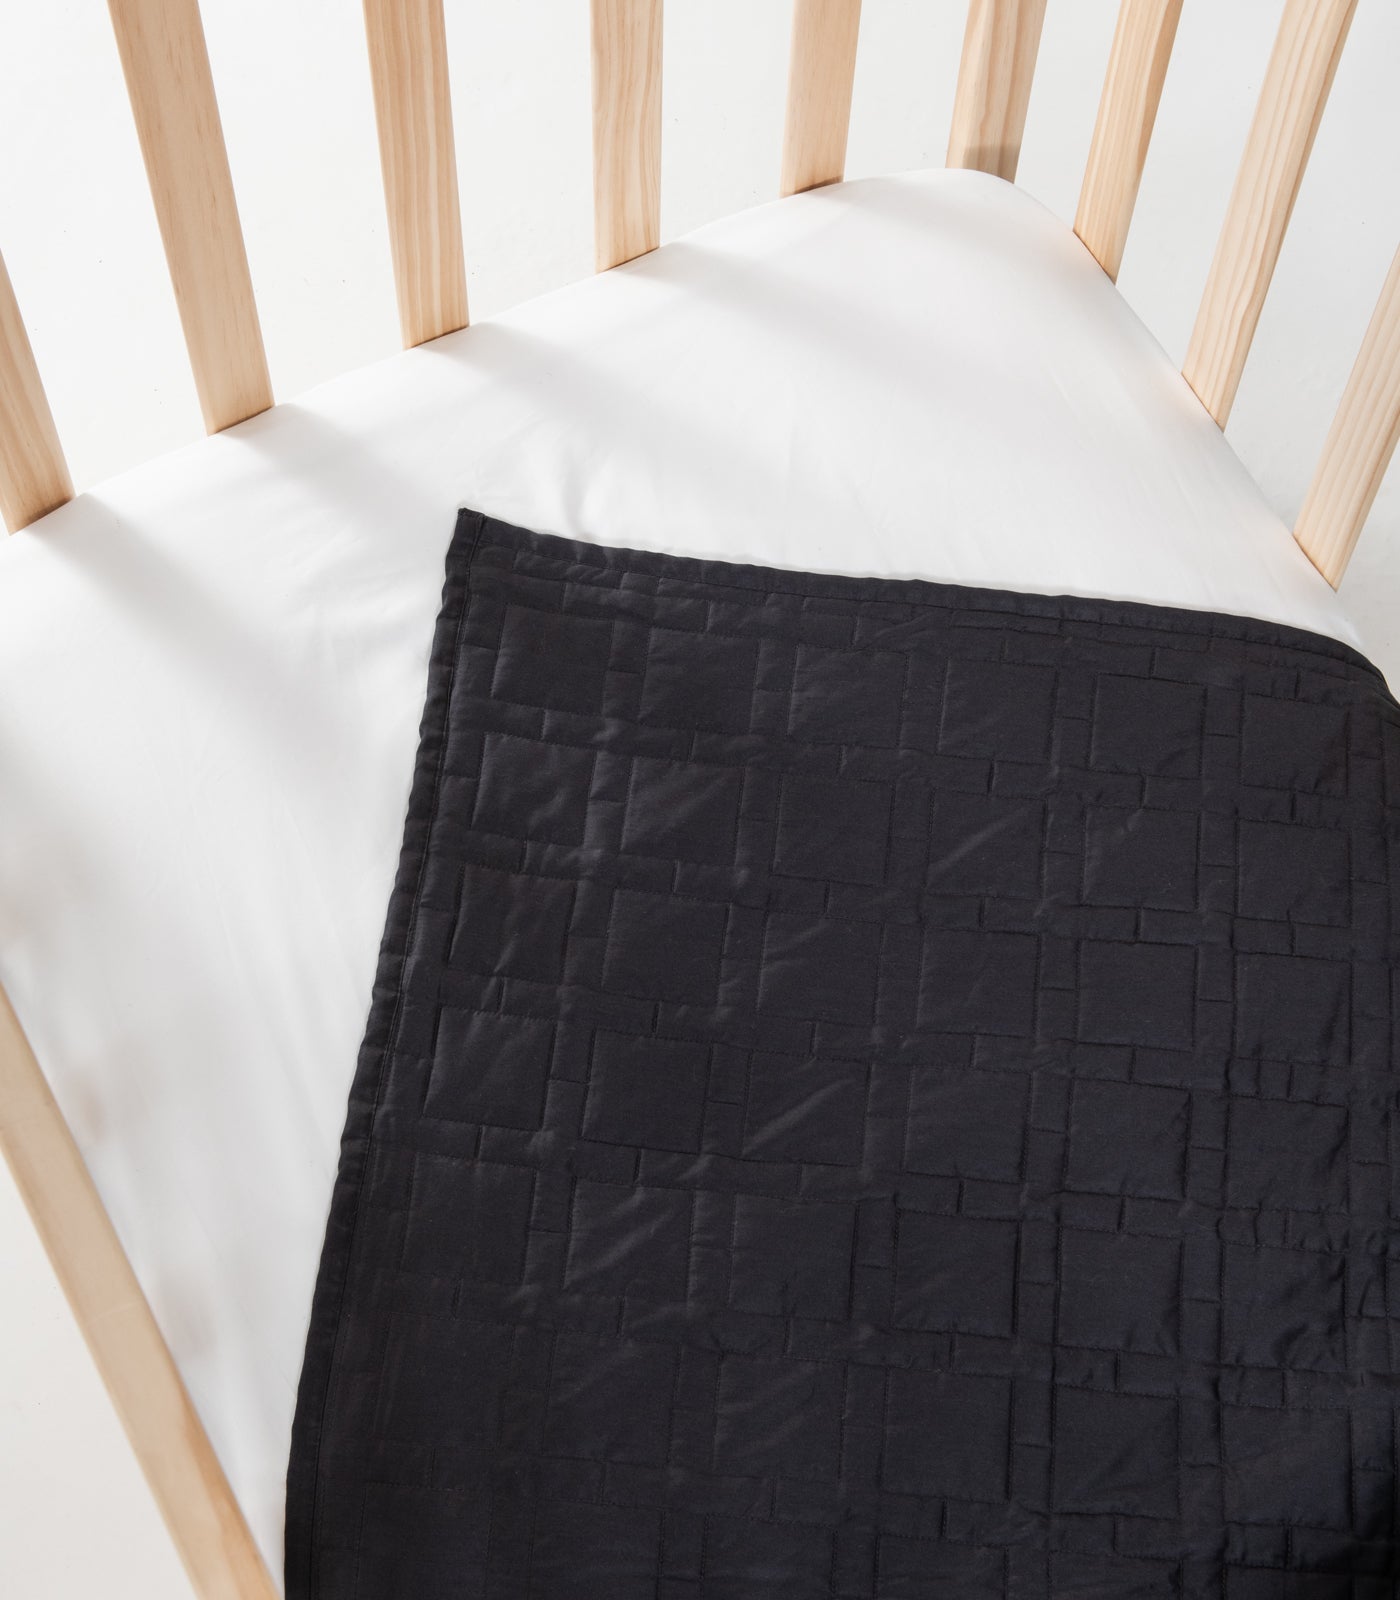 Bhumi Organic Cotton - Baby Quilted Blanket - Lattice Design - Charcoal